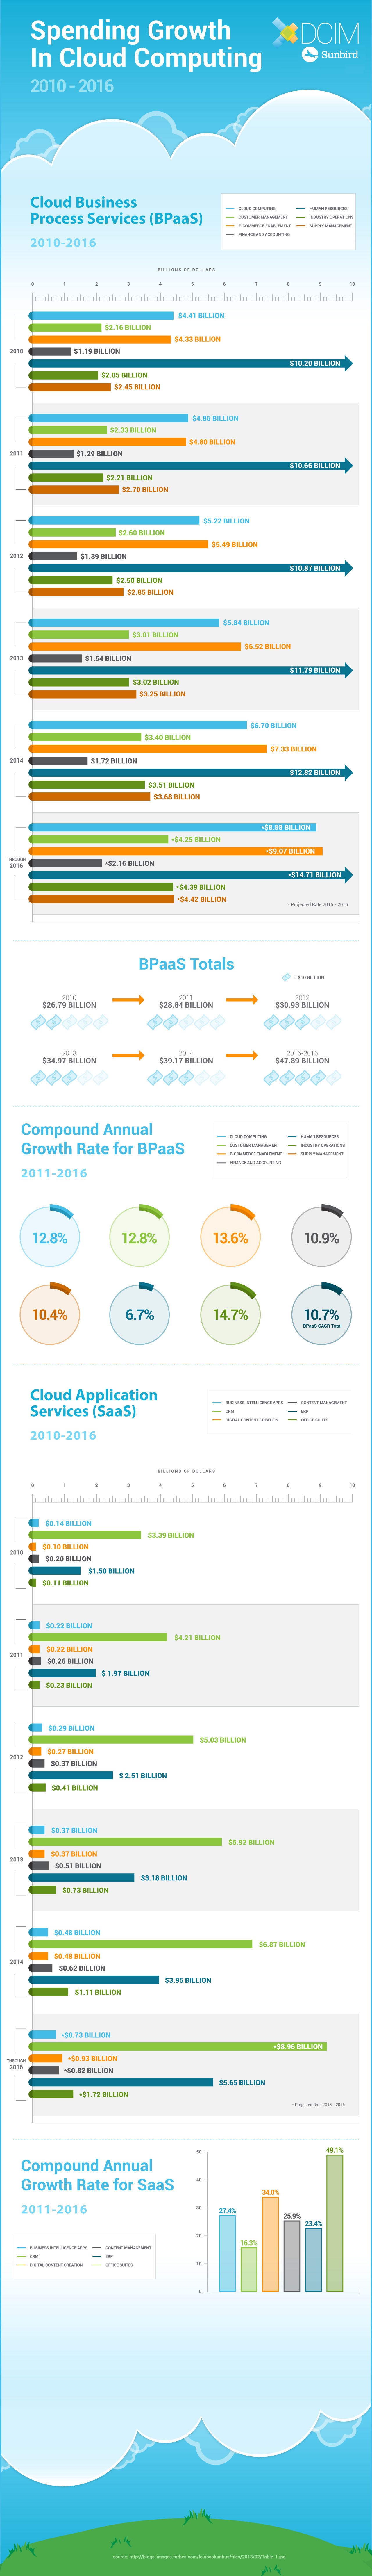 Infographic Spend Growth in Cloud Computing by Sunbird